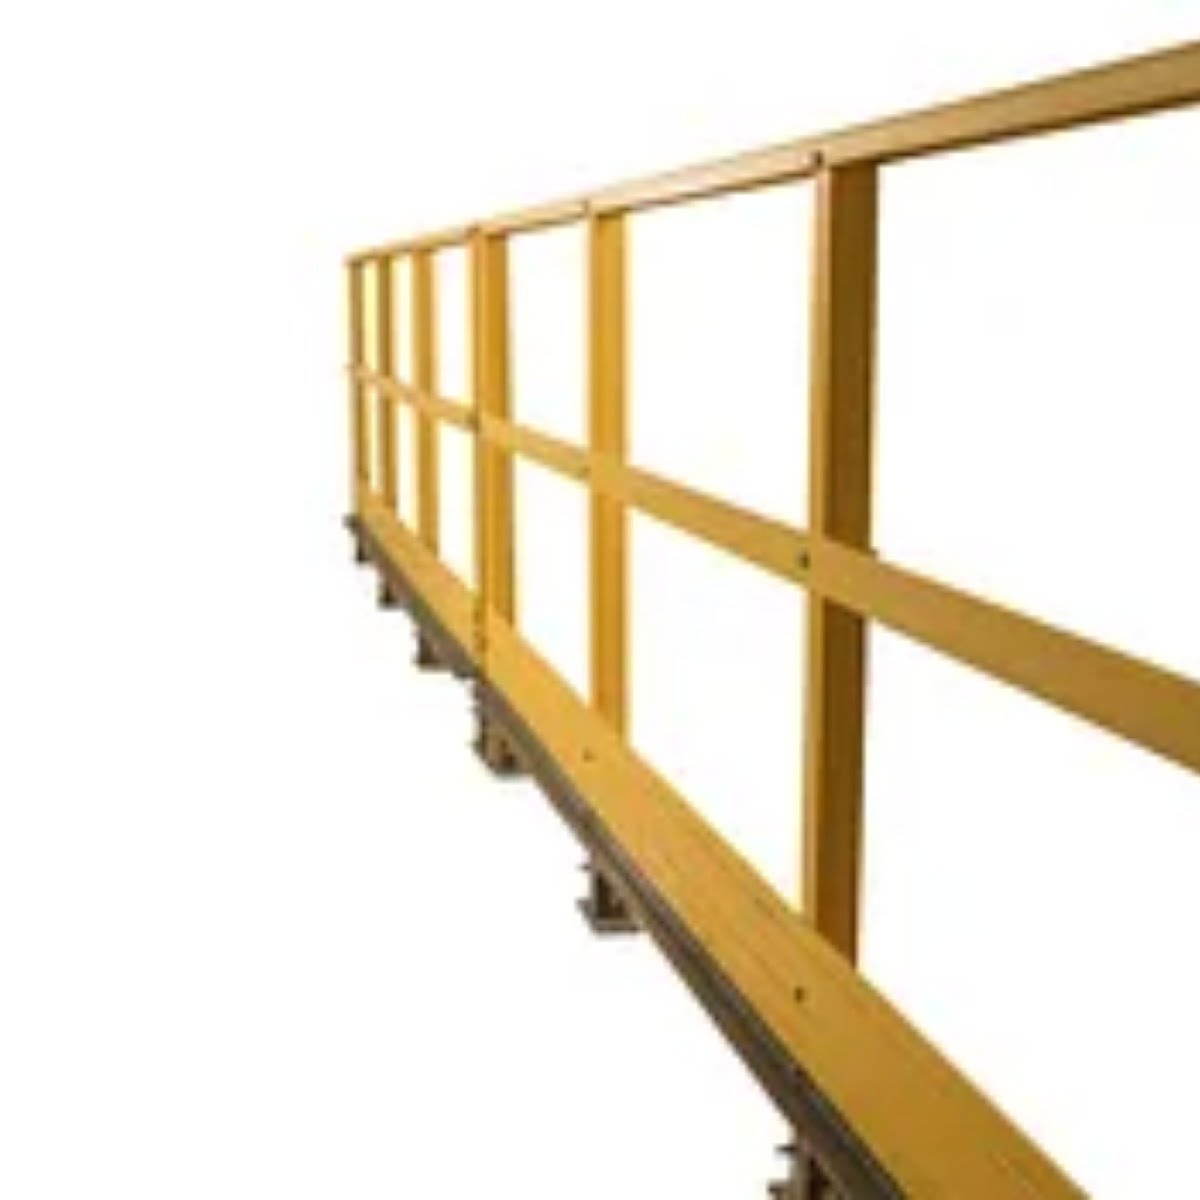 FRP Hand Rails, FRP hand rail manufacturer in india